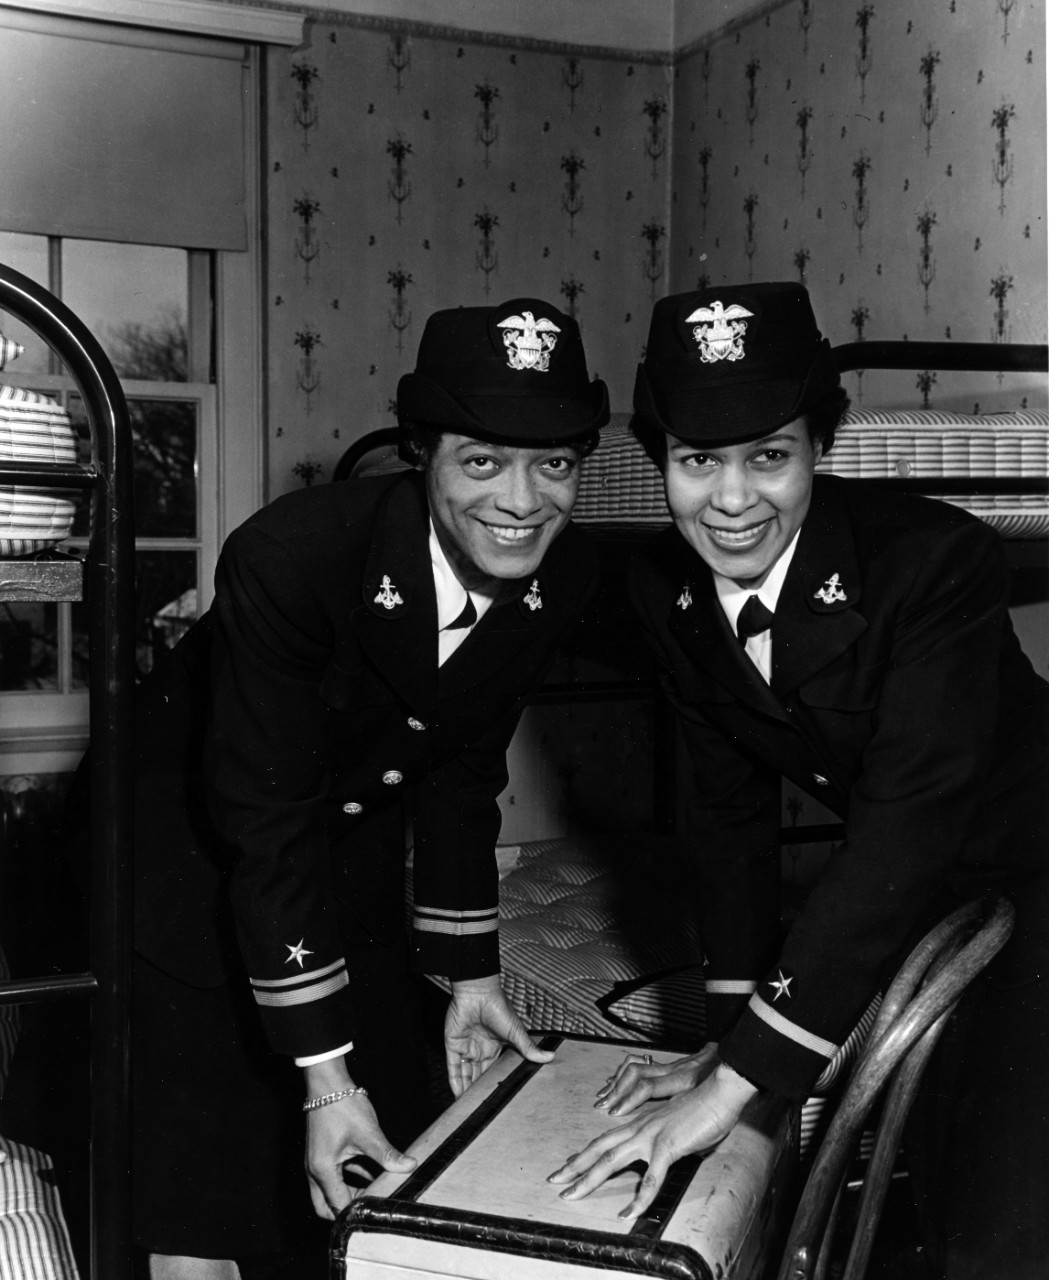 Two women in uniform learning over a suitcase in a dorm room.